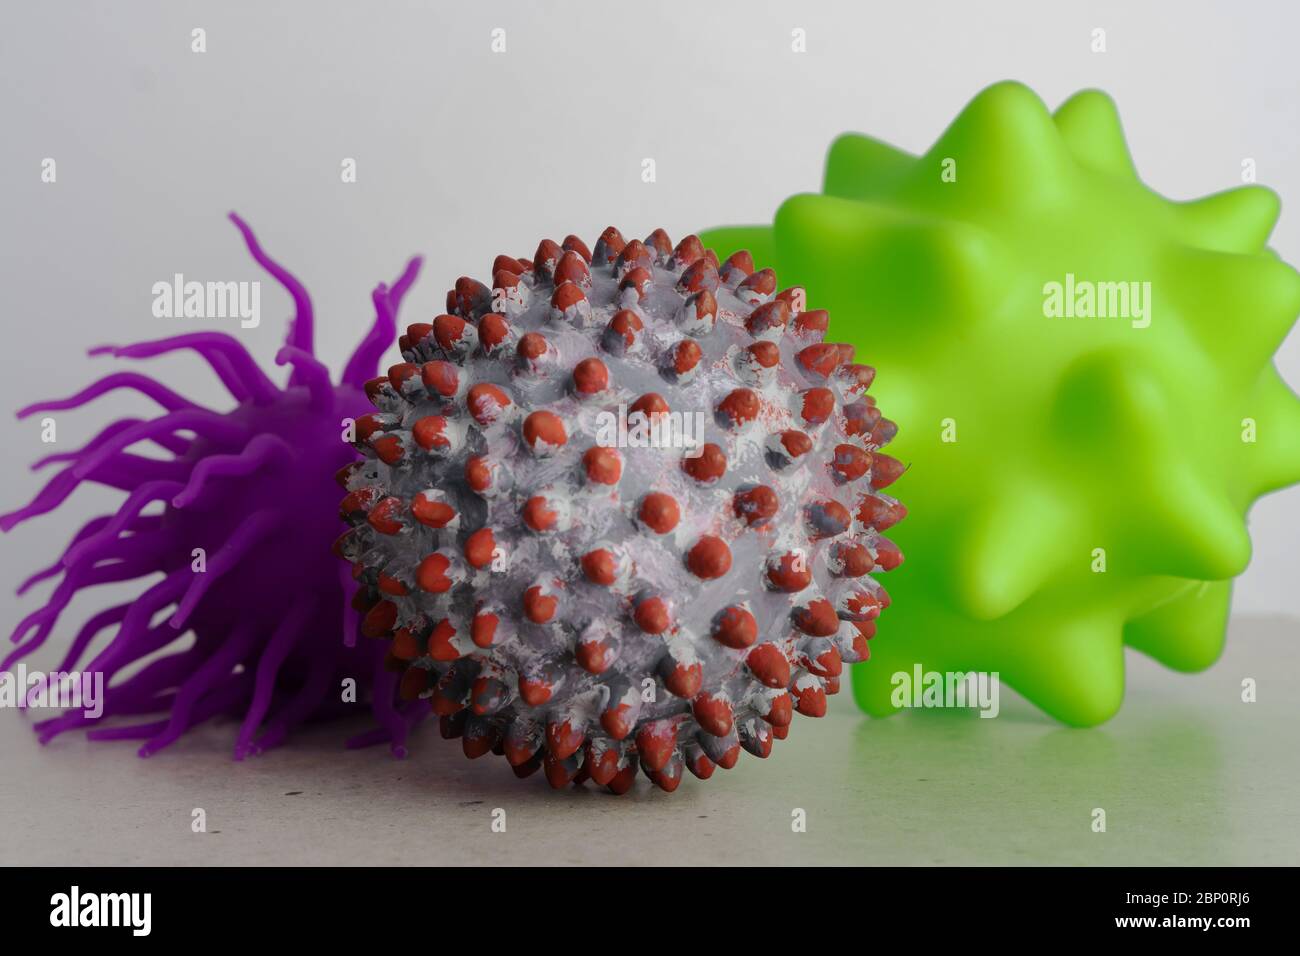 Two ball toys as a representation of virus or bacterias and one as a symbol of a SARS-CoV-2 virion Stock Photo